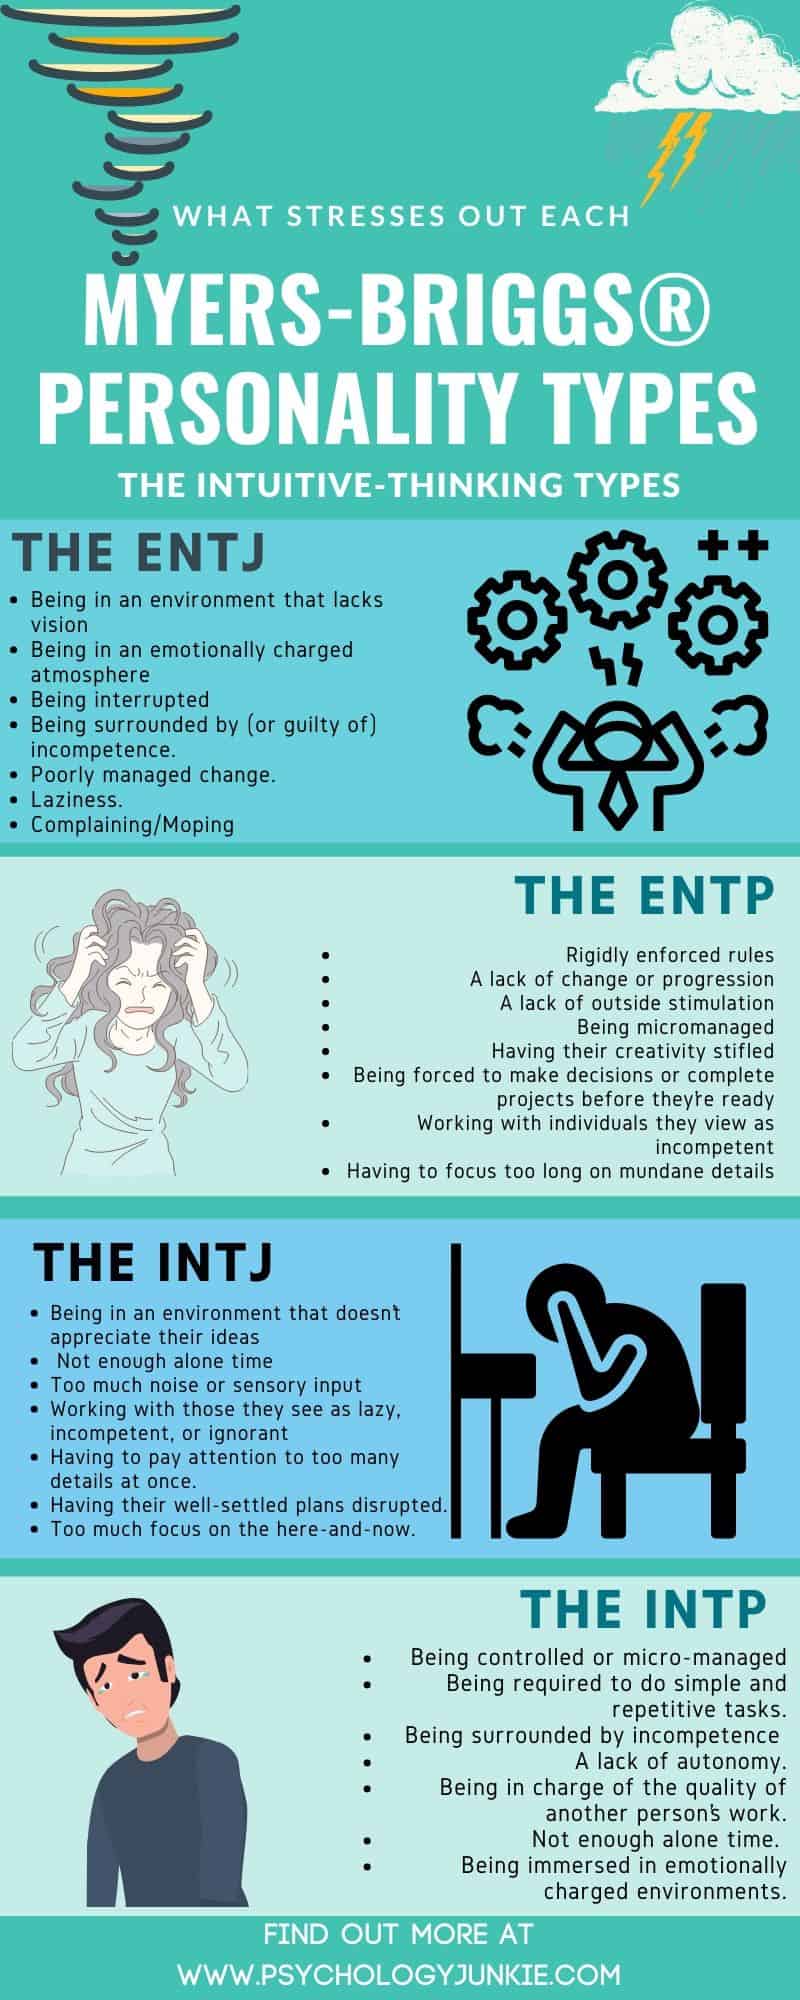 What is the difference between ENTJ and INTJ on the Myers-Briggs